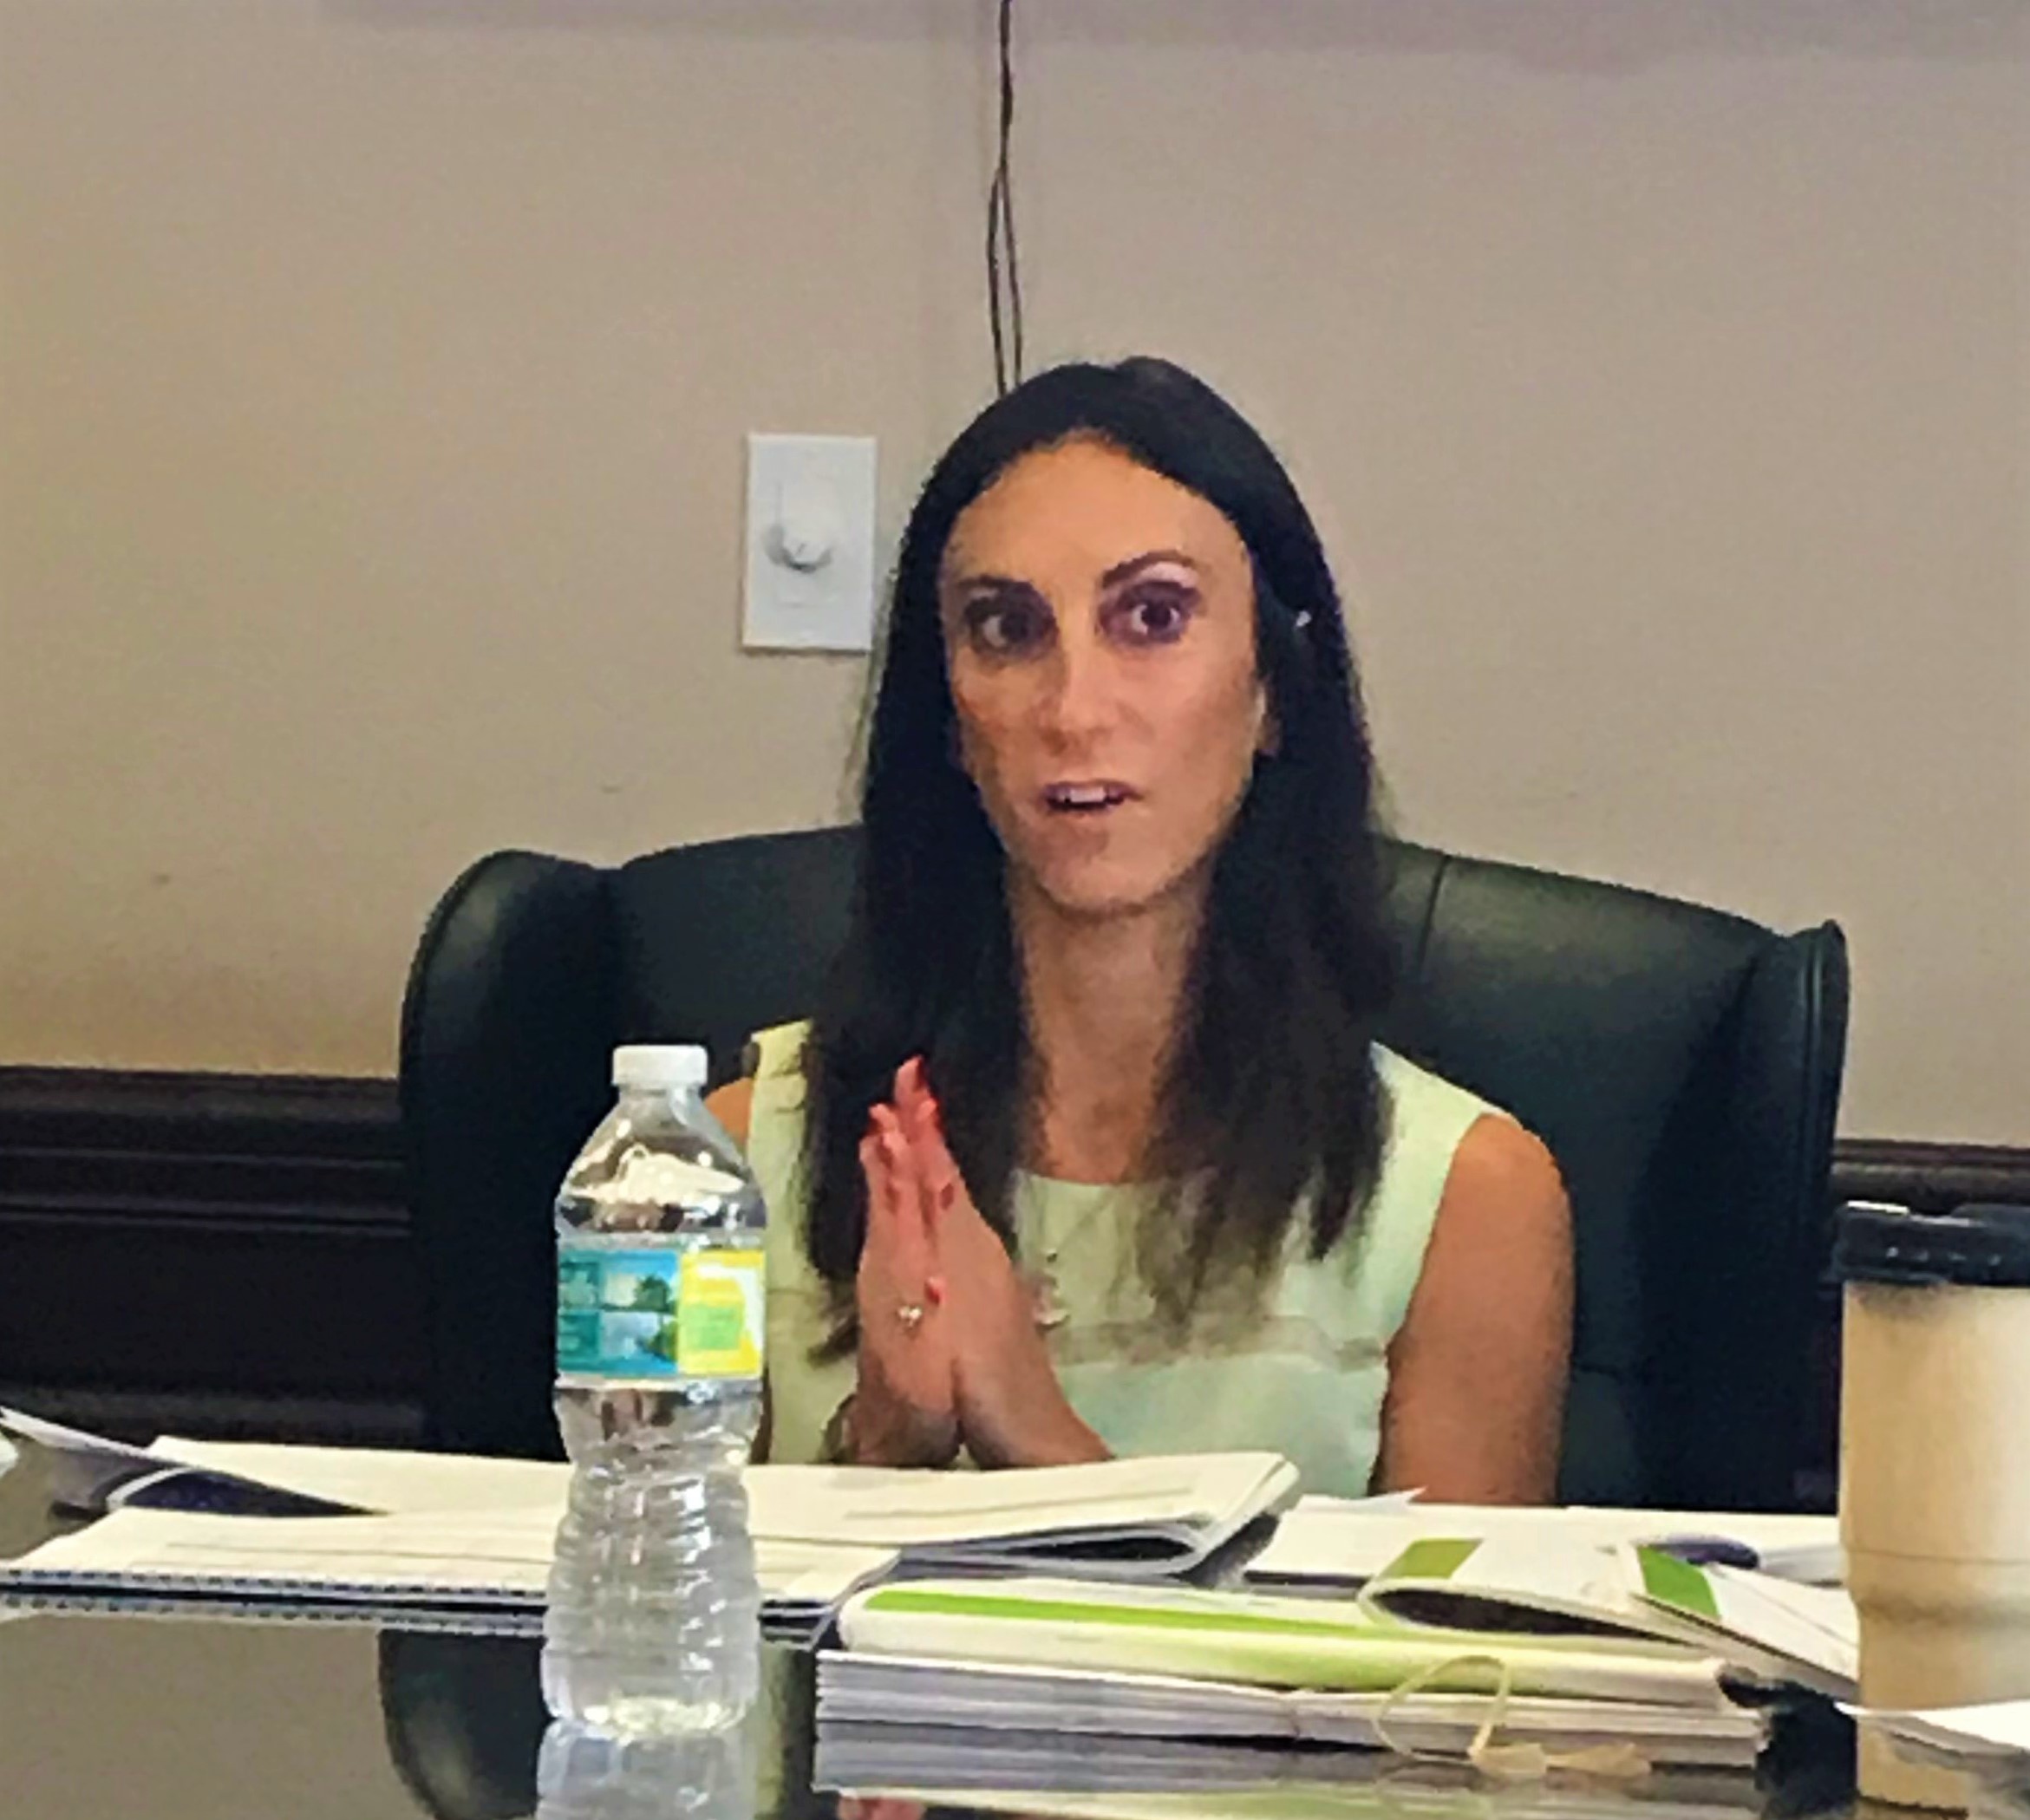 Alyse Vishnick, VP, Institutional Relationship Management from OFI Global Asset Management provided an update on the emerging market portfolio. Among topics, Risk Management was noted.